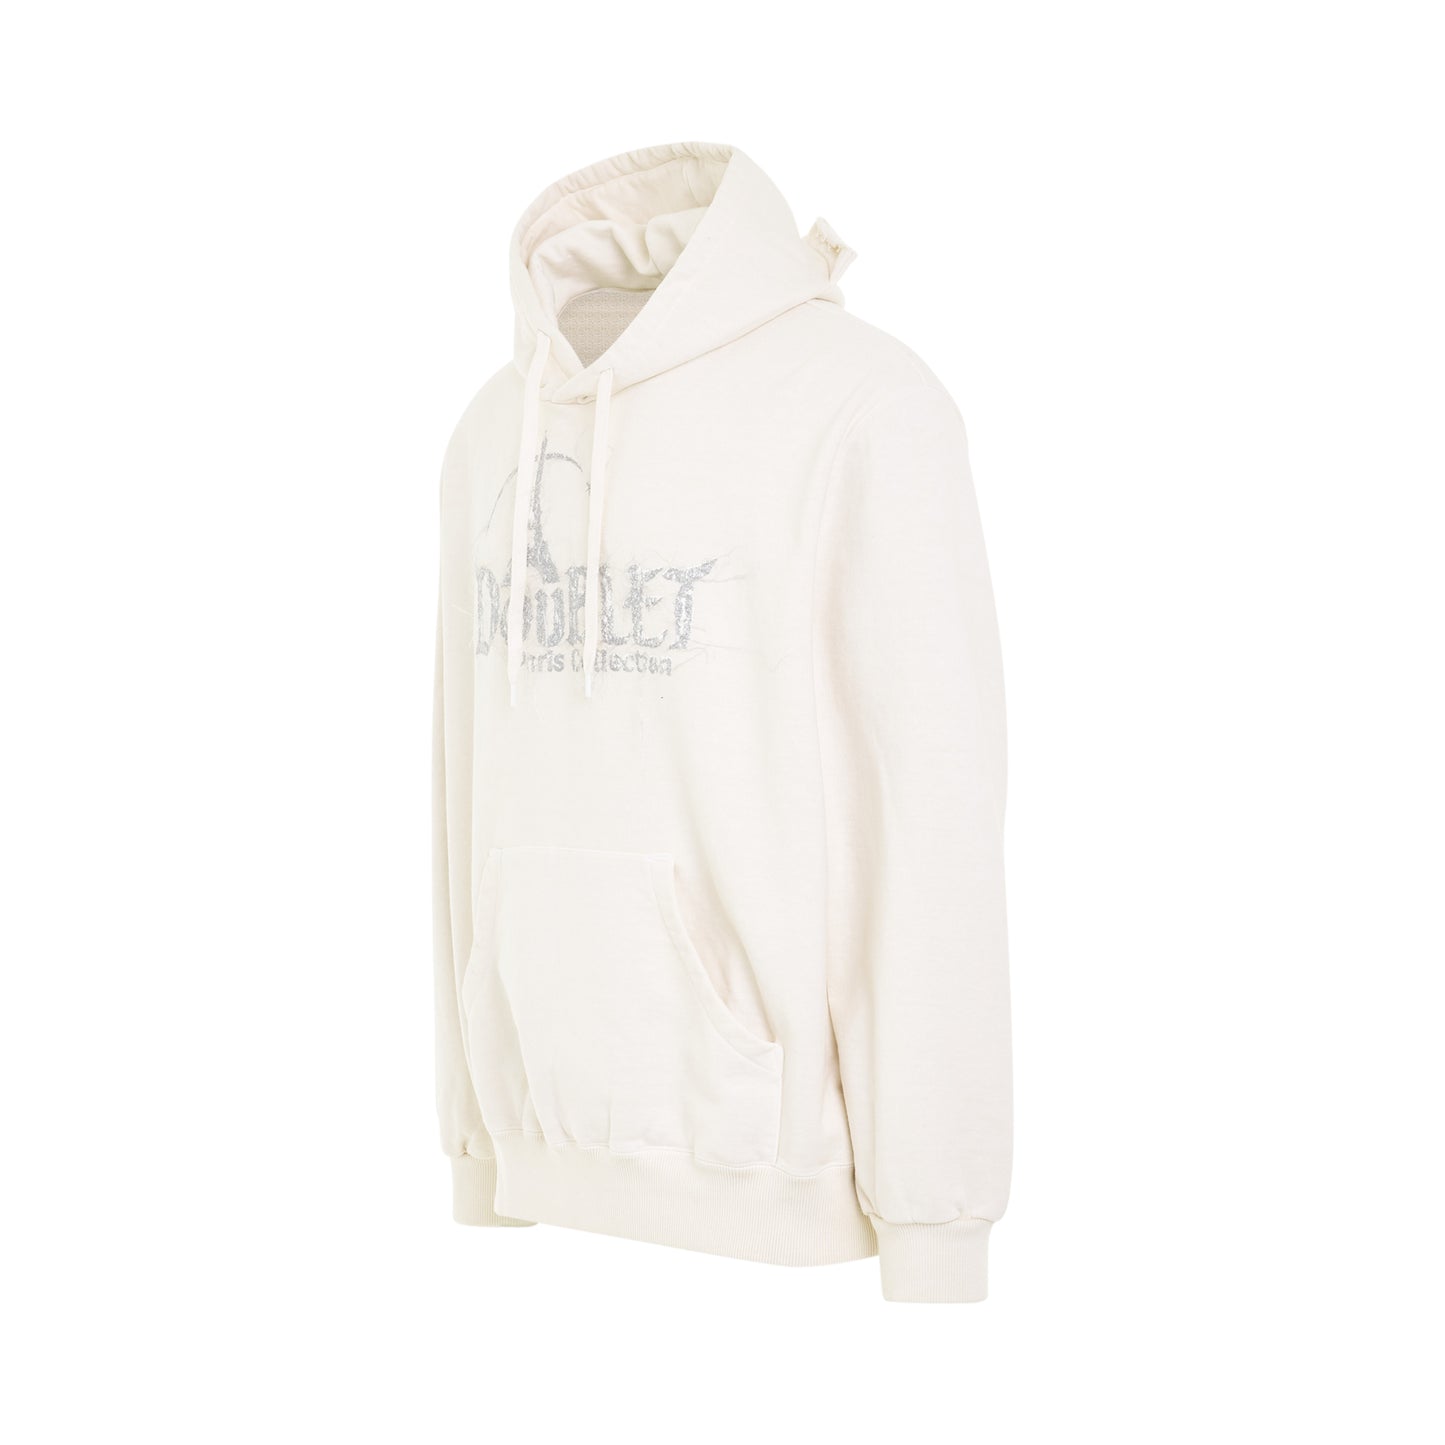 "DOUBLAND" Embroidery Hoodie in White